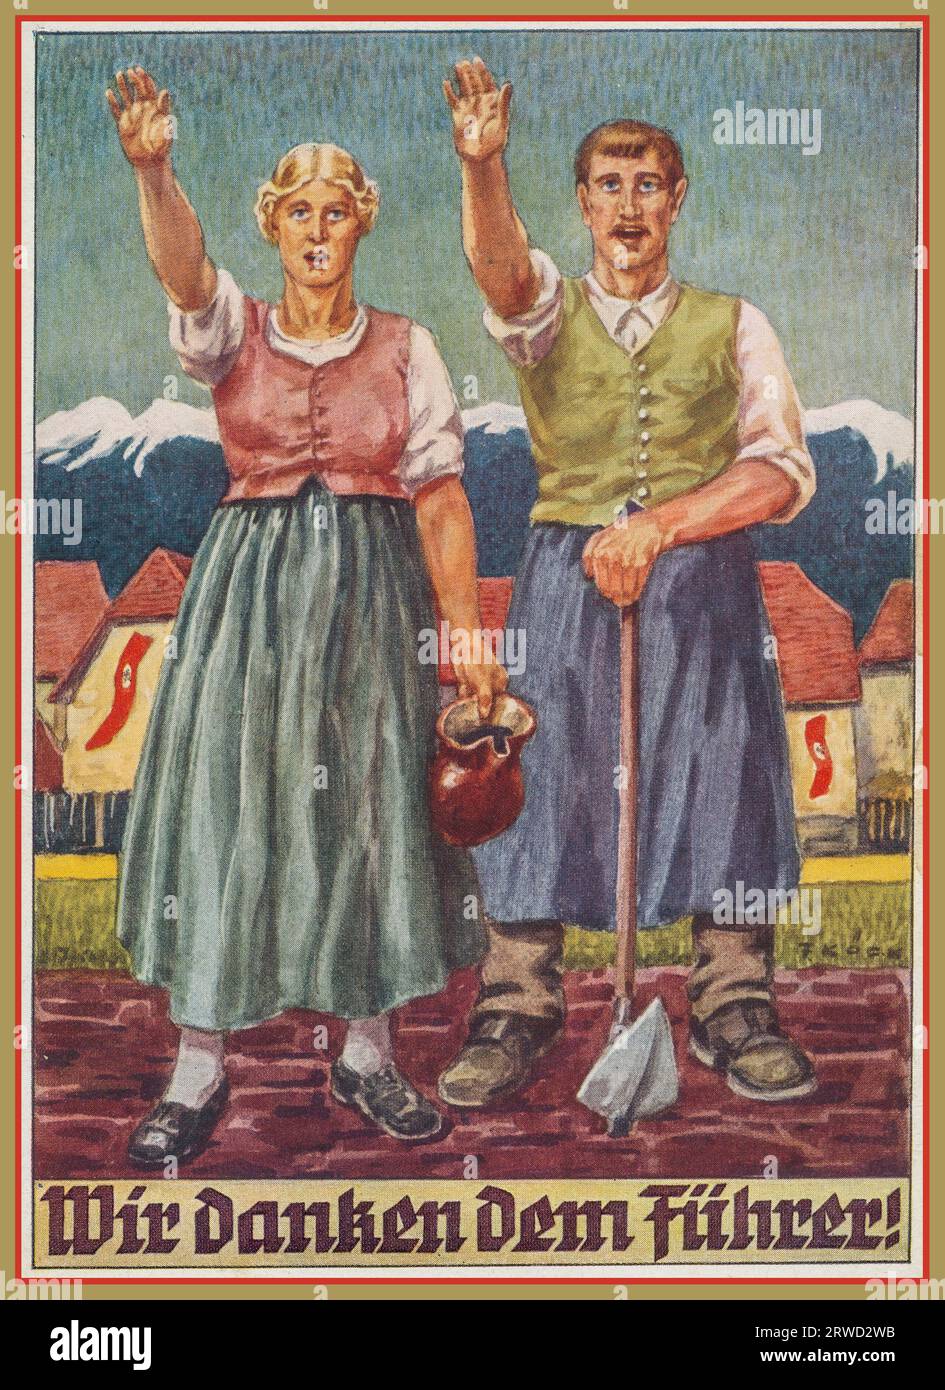 1930s Nazi Germany Propaganda Poster Card 'Wir dankendem Fuhrer' WE THANK YOU OUR FUHRER ! illustrating a couple in rural Nazi Germany giving the Heil Hitler salute to their leader Fuhrer Adolf Hitler. Swastika banners in background 1930s Nazi Germany Stock Photo